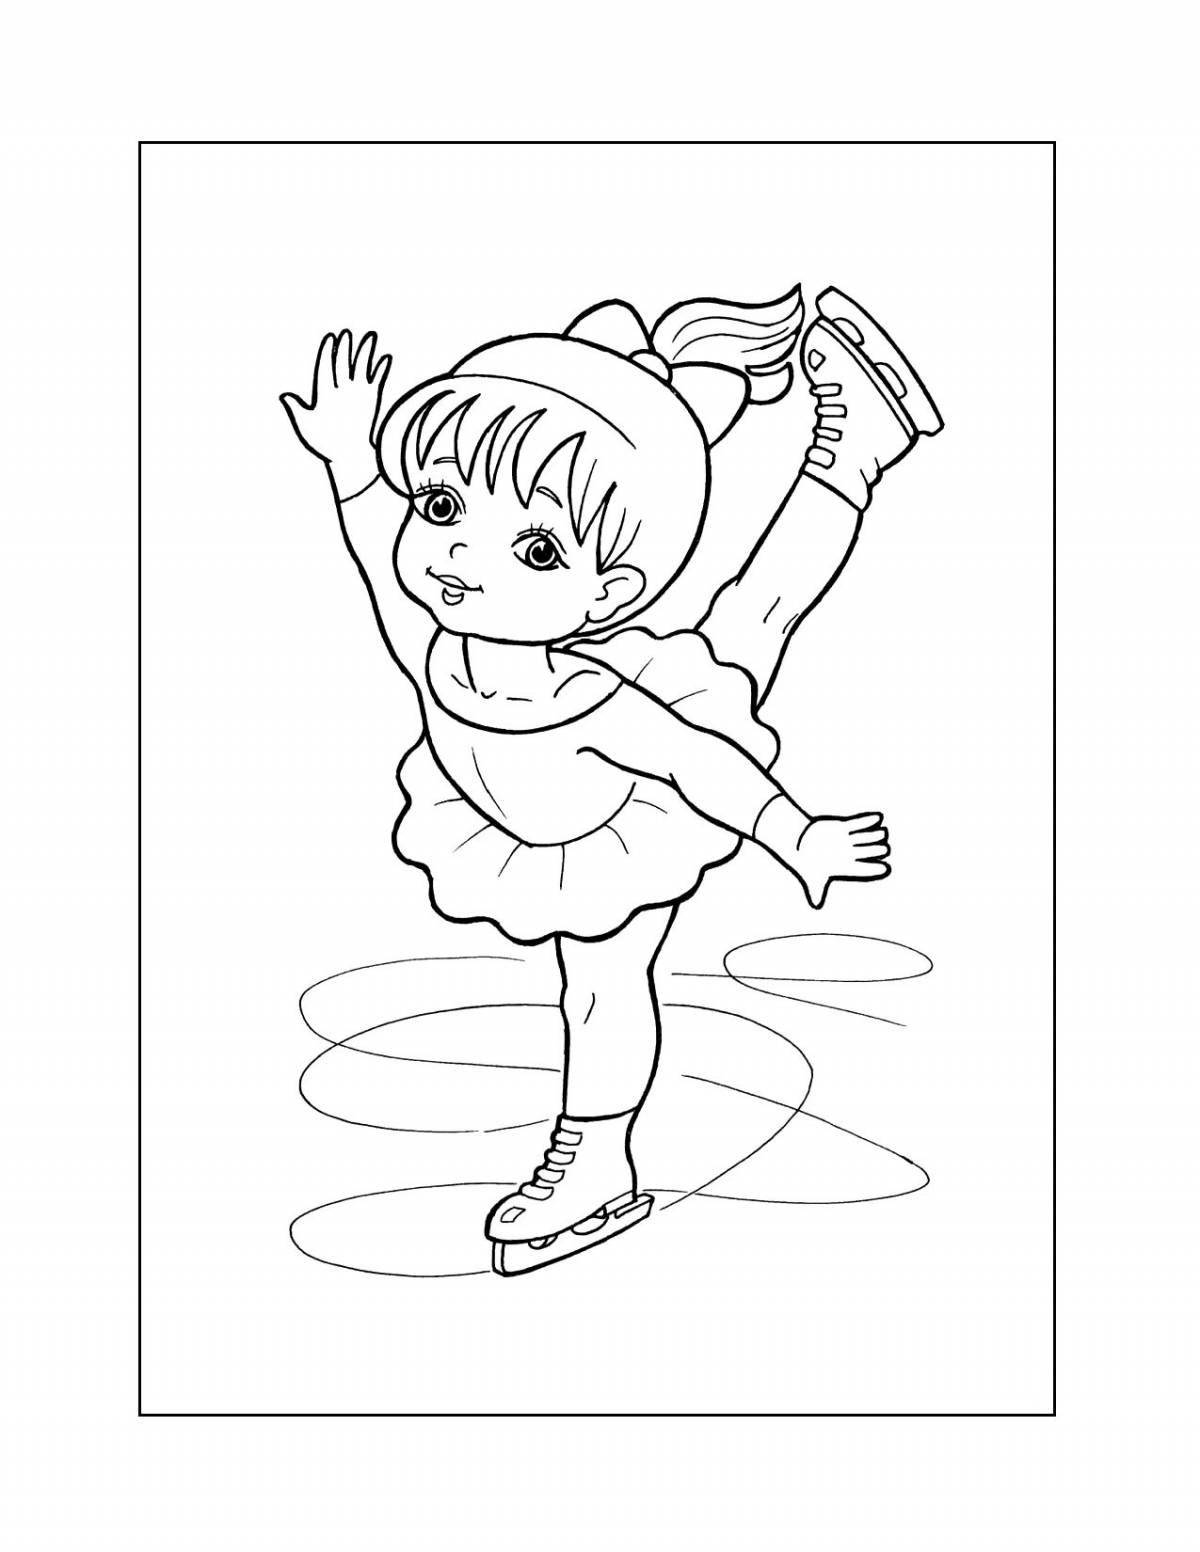 Excited sports coloring page